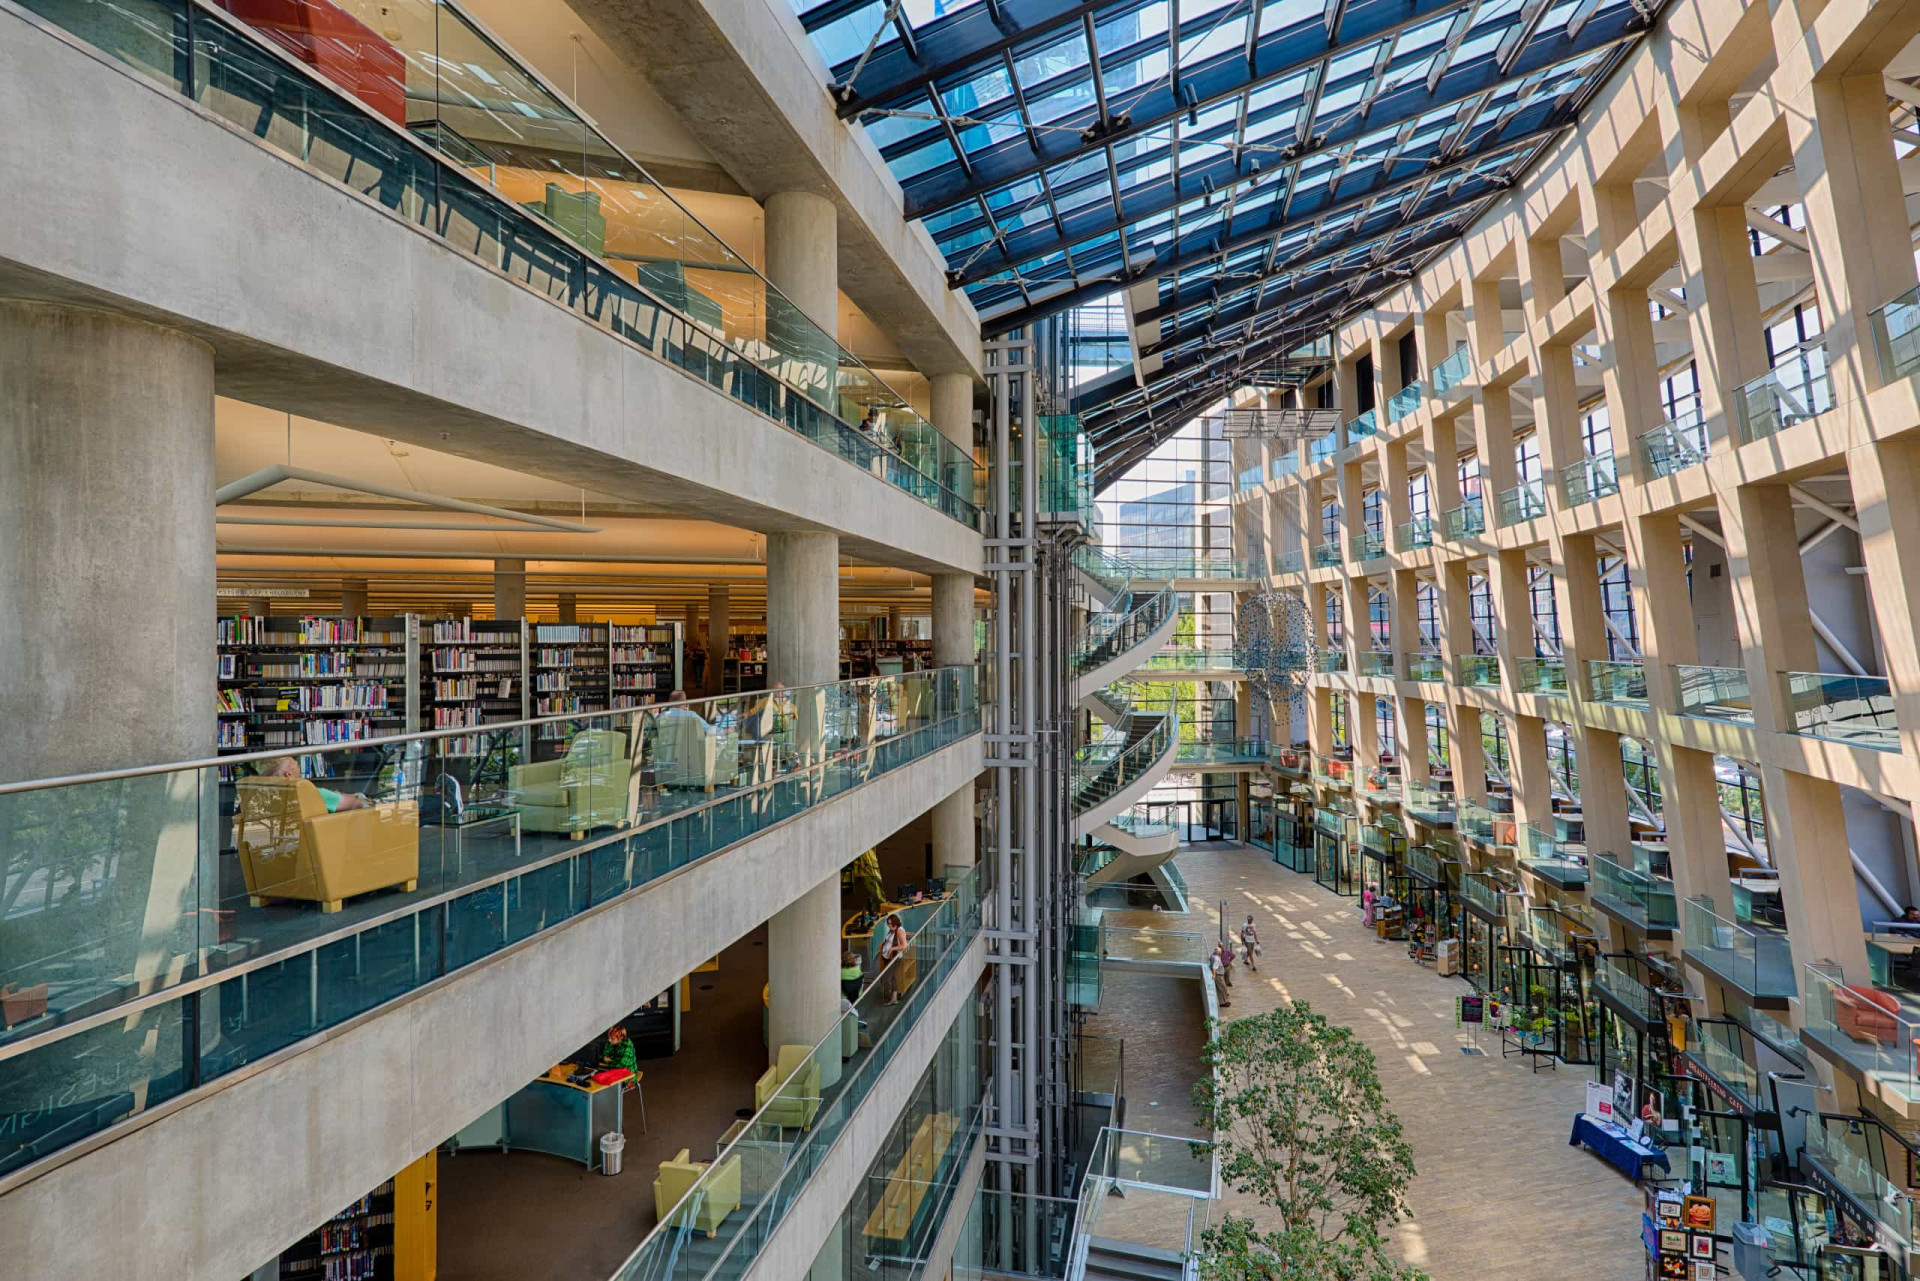 <p>Bathed in natural light, the interior of the fabulous Salt Lake City Public Library building is an architectural triumph.</p><p>You may also like:<a href="https://www.starsinsider.com/n/426788?utm_source=msn.com&utm_medium=display&utm_campaign=referral_description&utm_content=198095v22en-en"> The best supplements to boost your immune system</a></p>